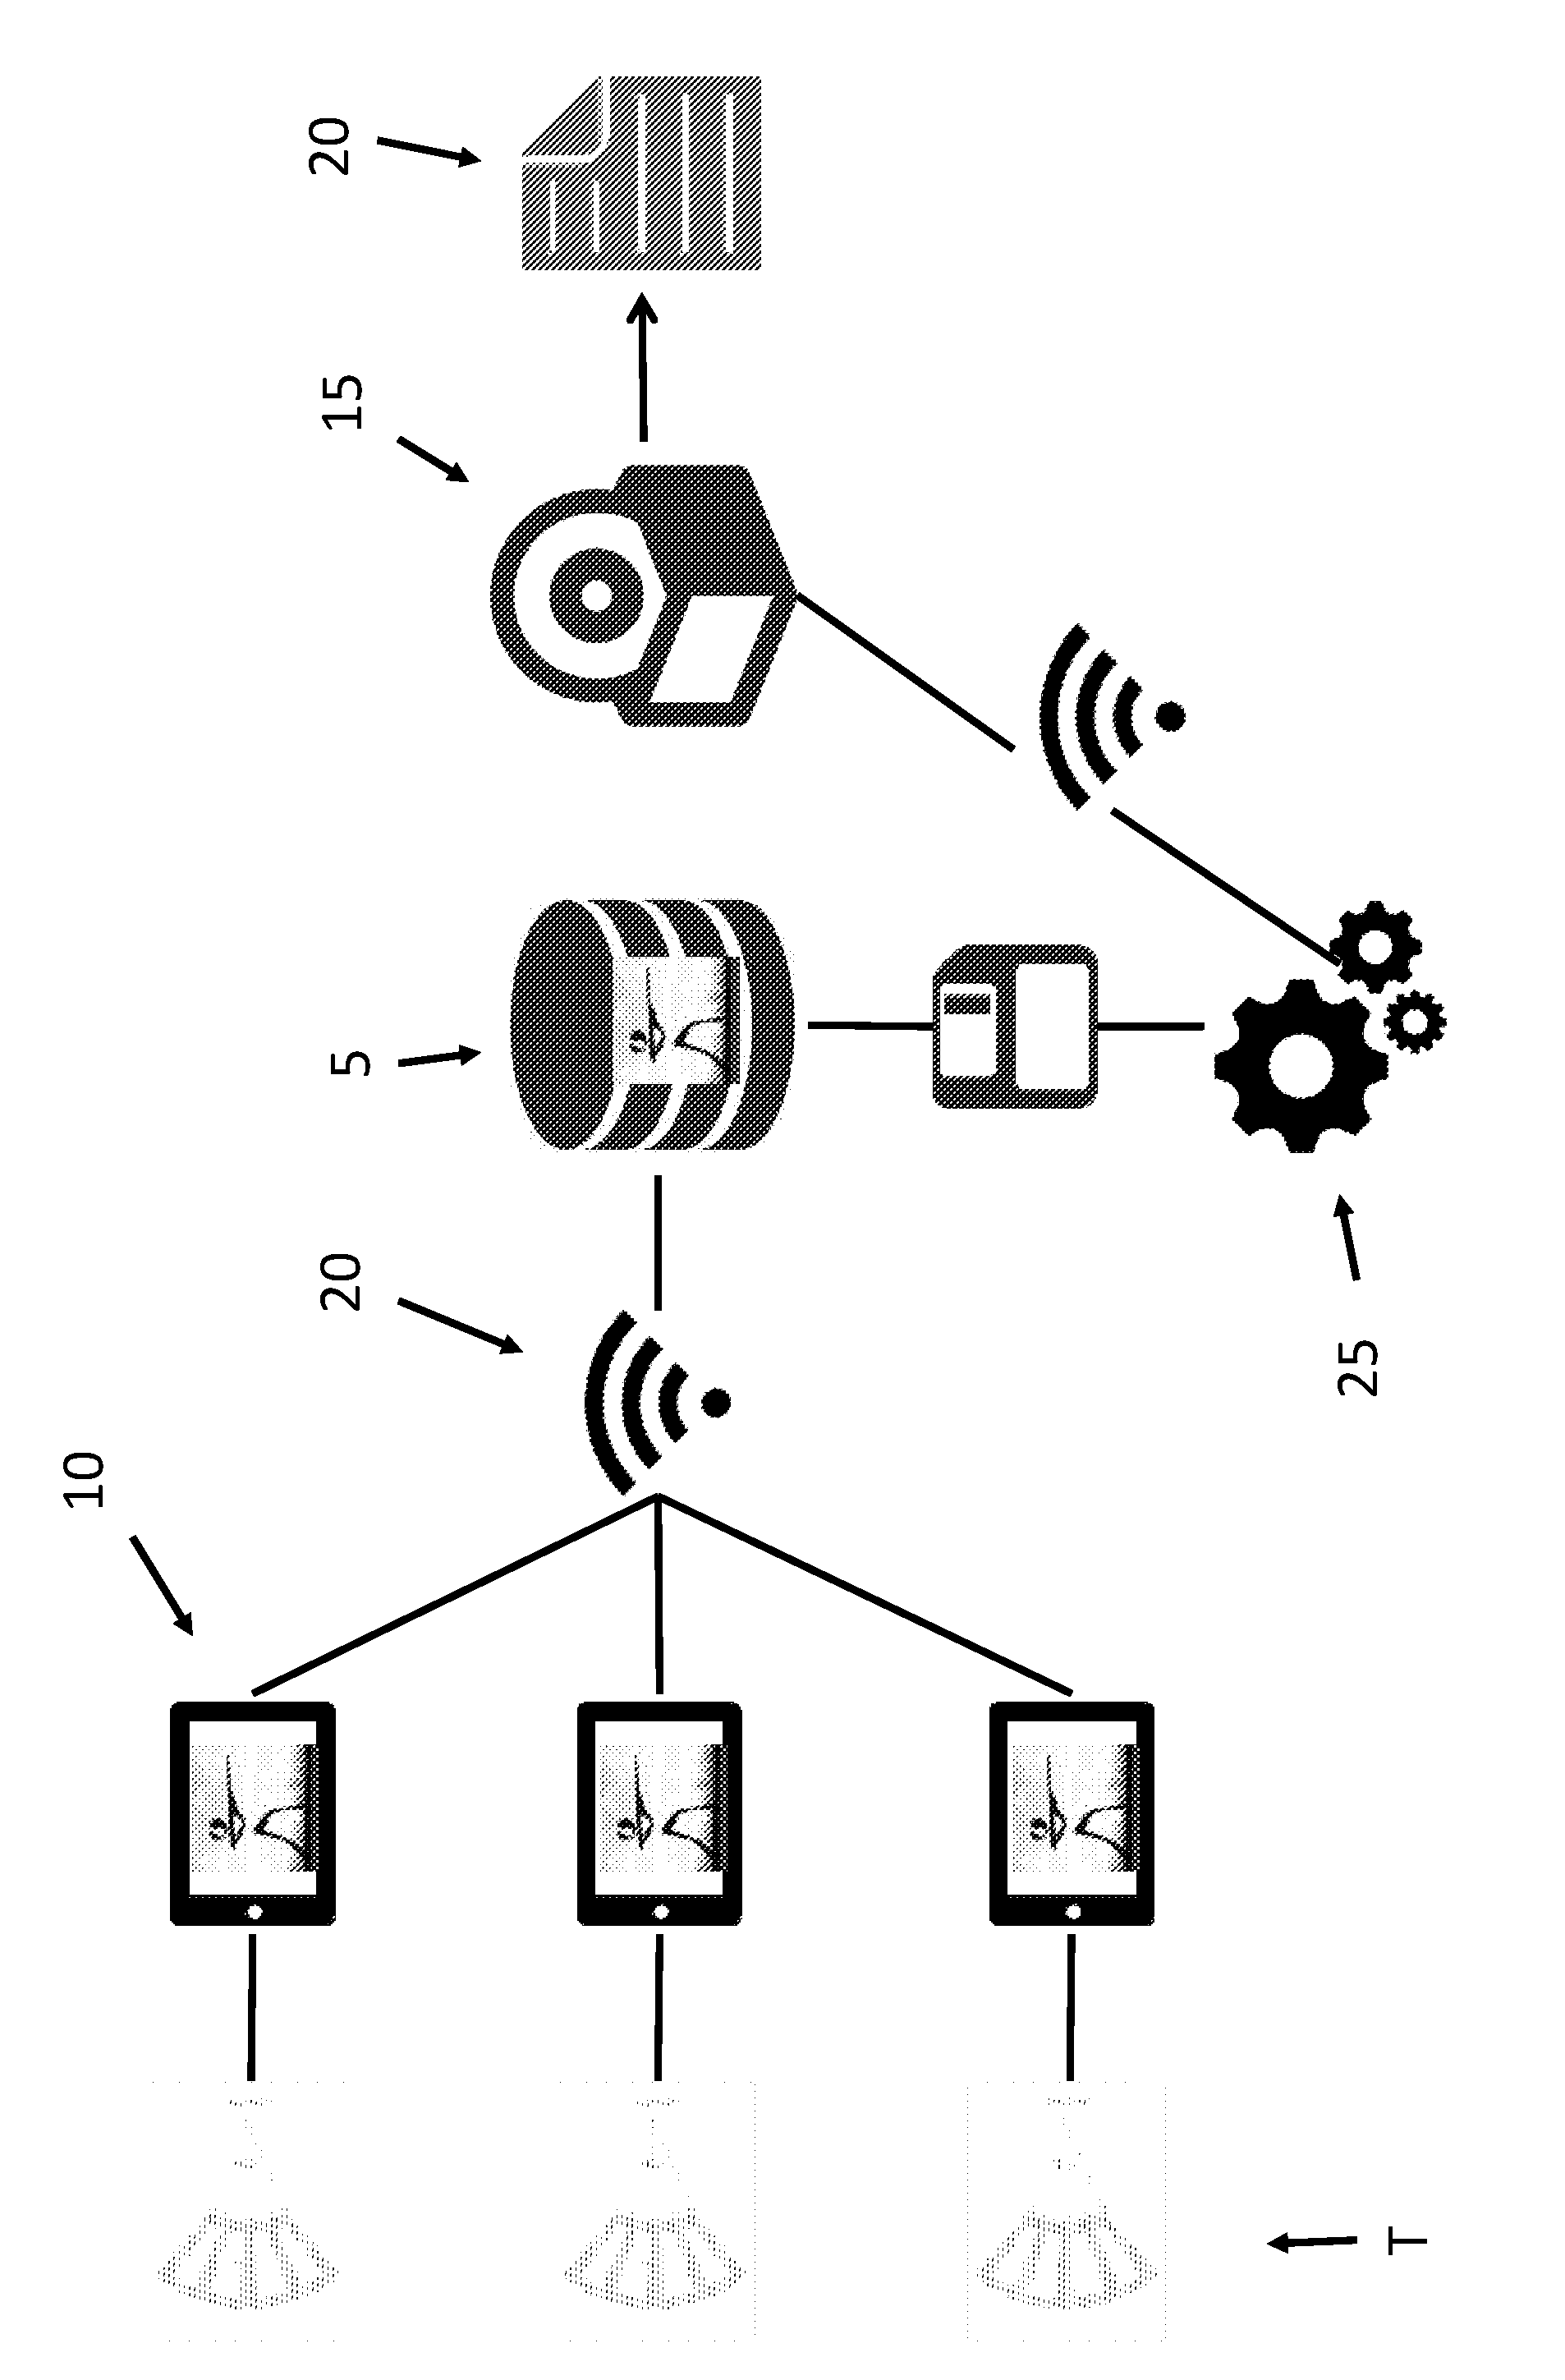 Method of and System for Capturing and Reporting Scores